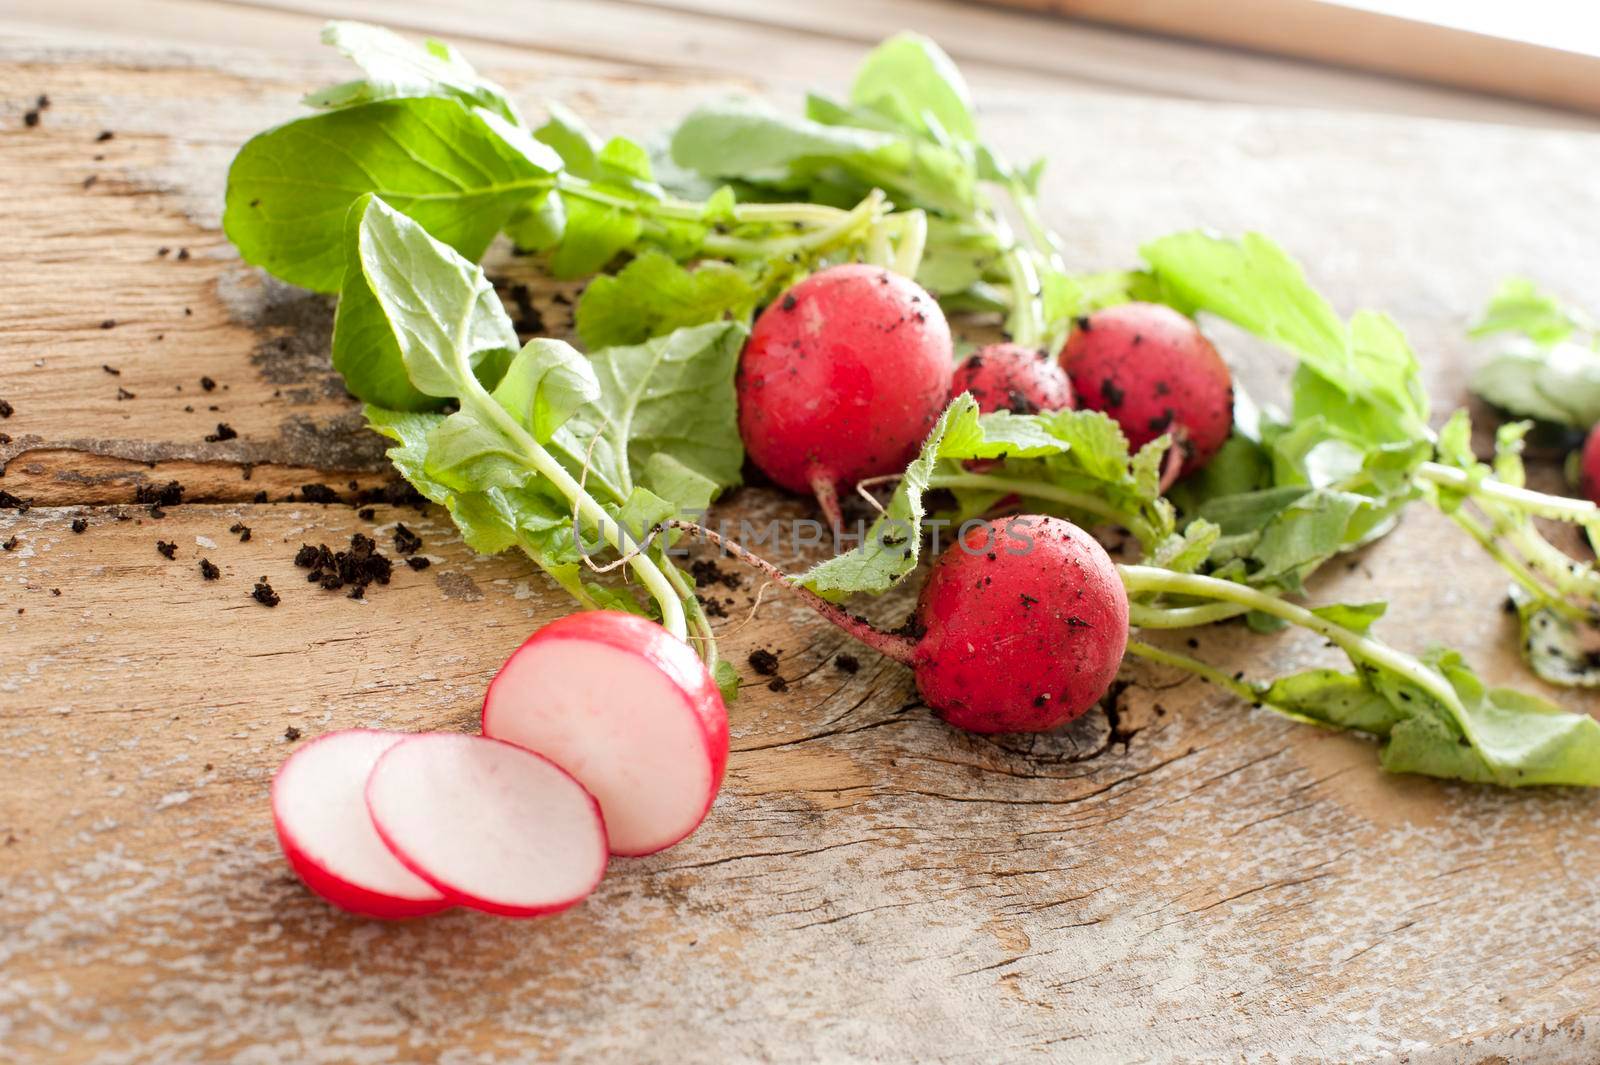 Slicing a farm fresh bunch of radishes for salad ingredients on a rustic wooden table with scattered remnants of soil